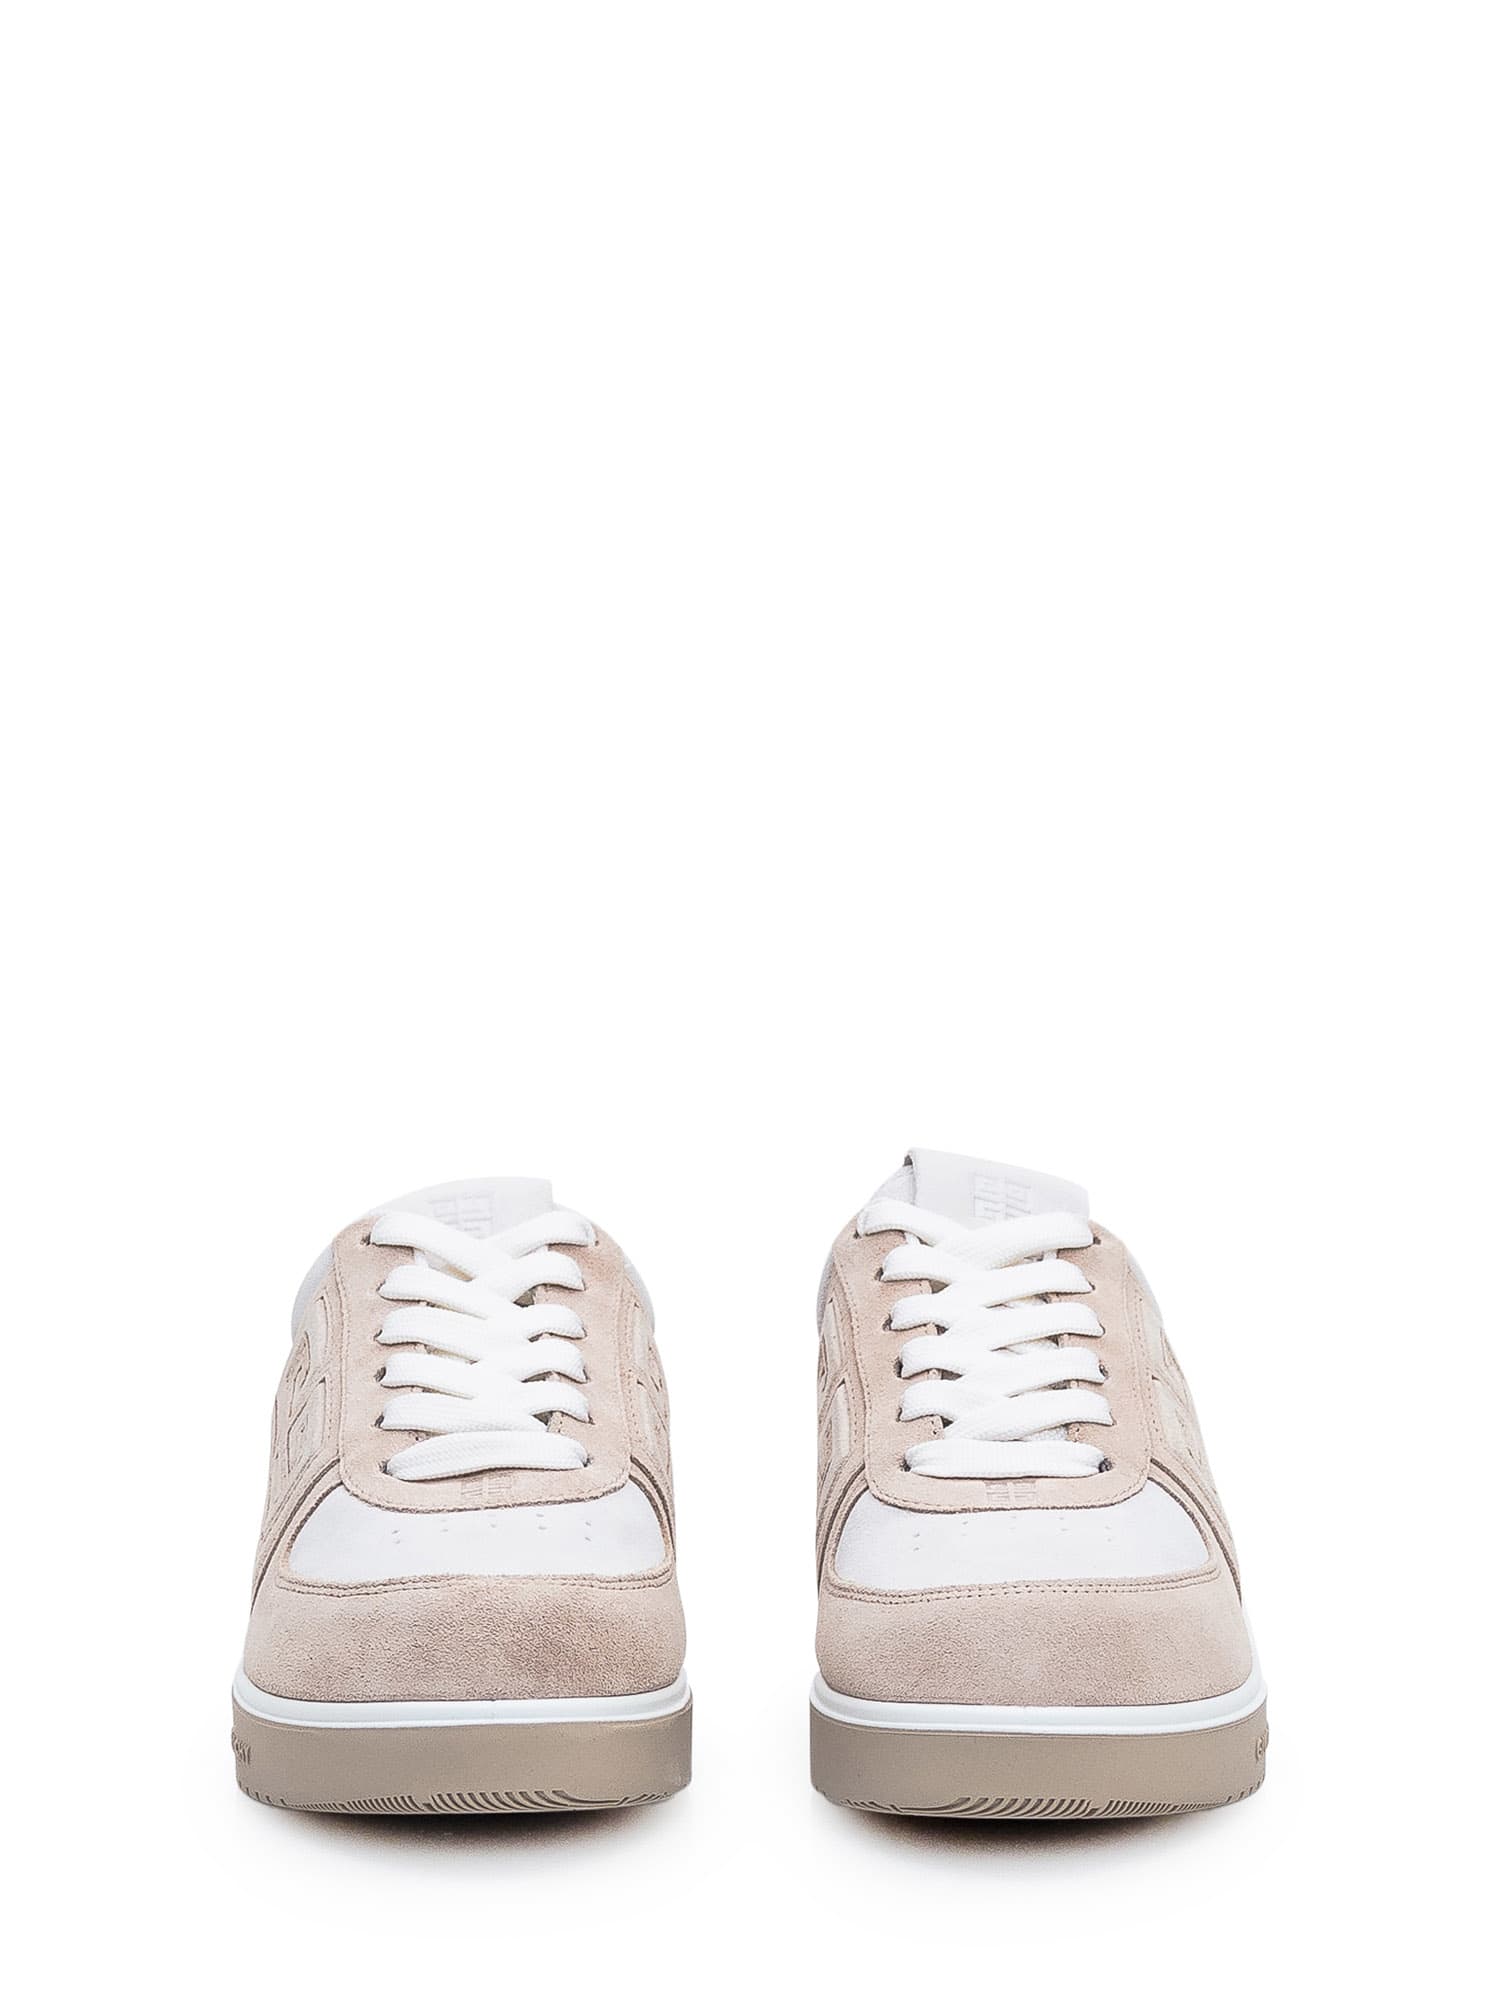 Shop Givenchy G4 Sneaker In Beige White